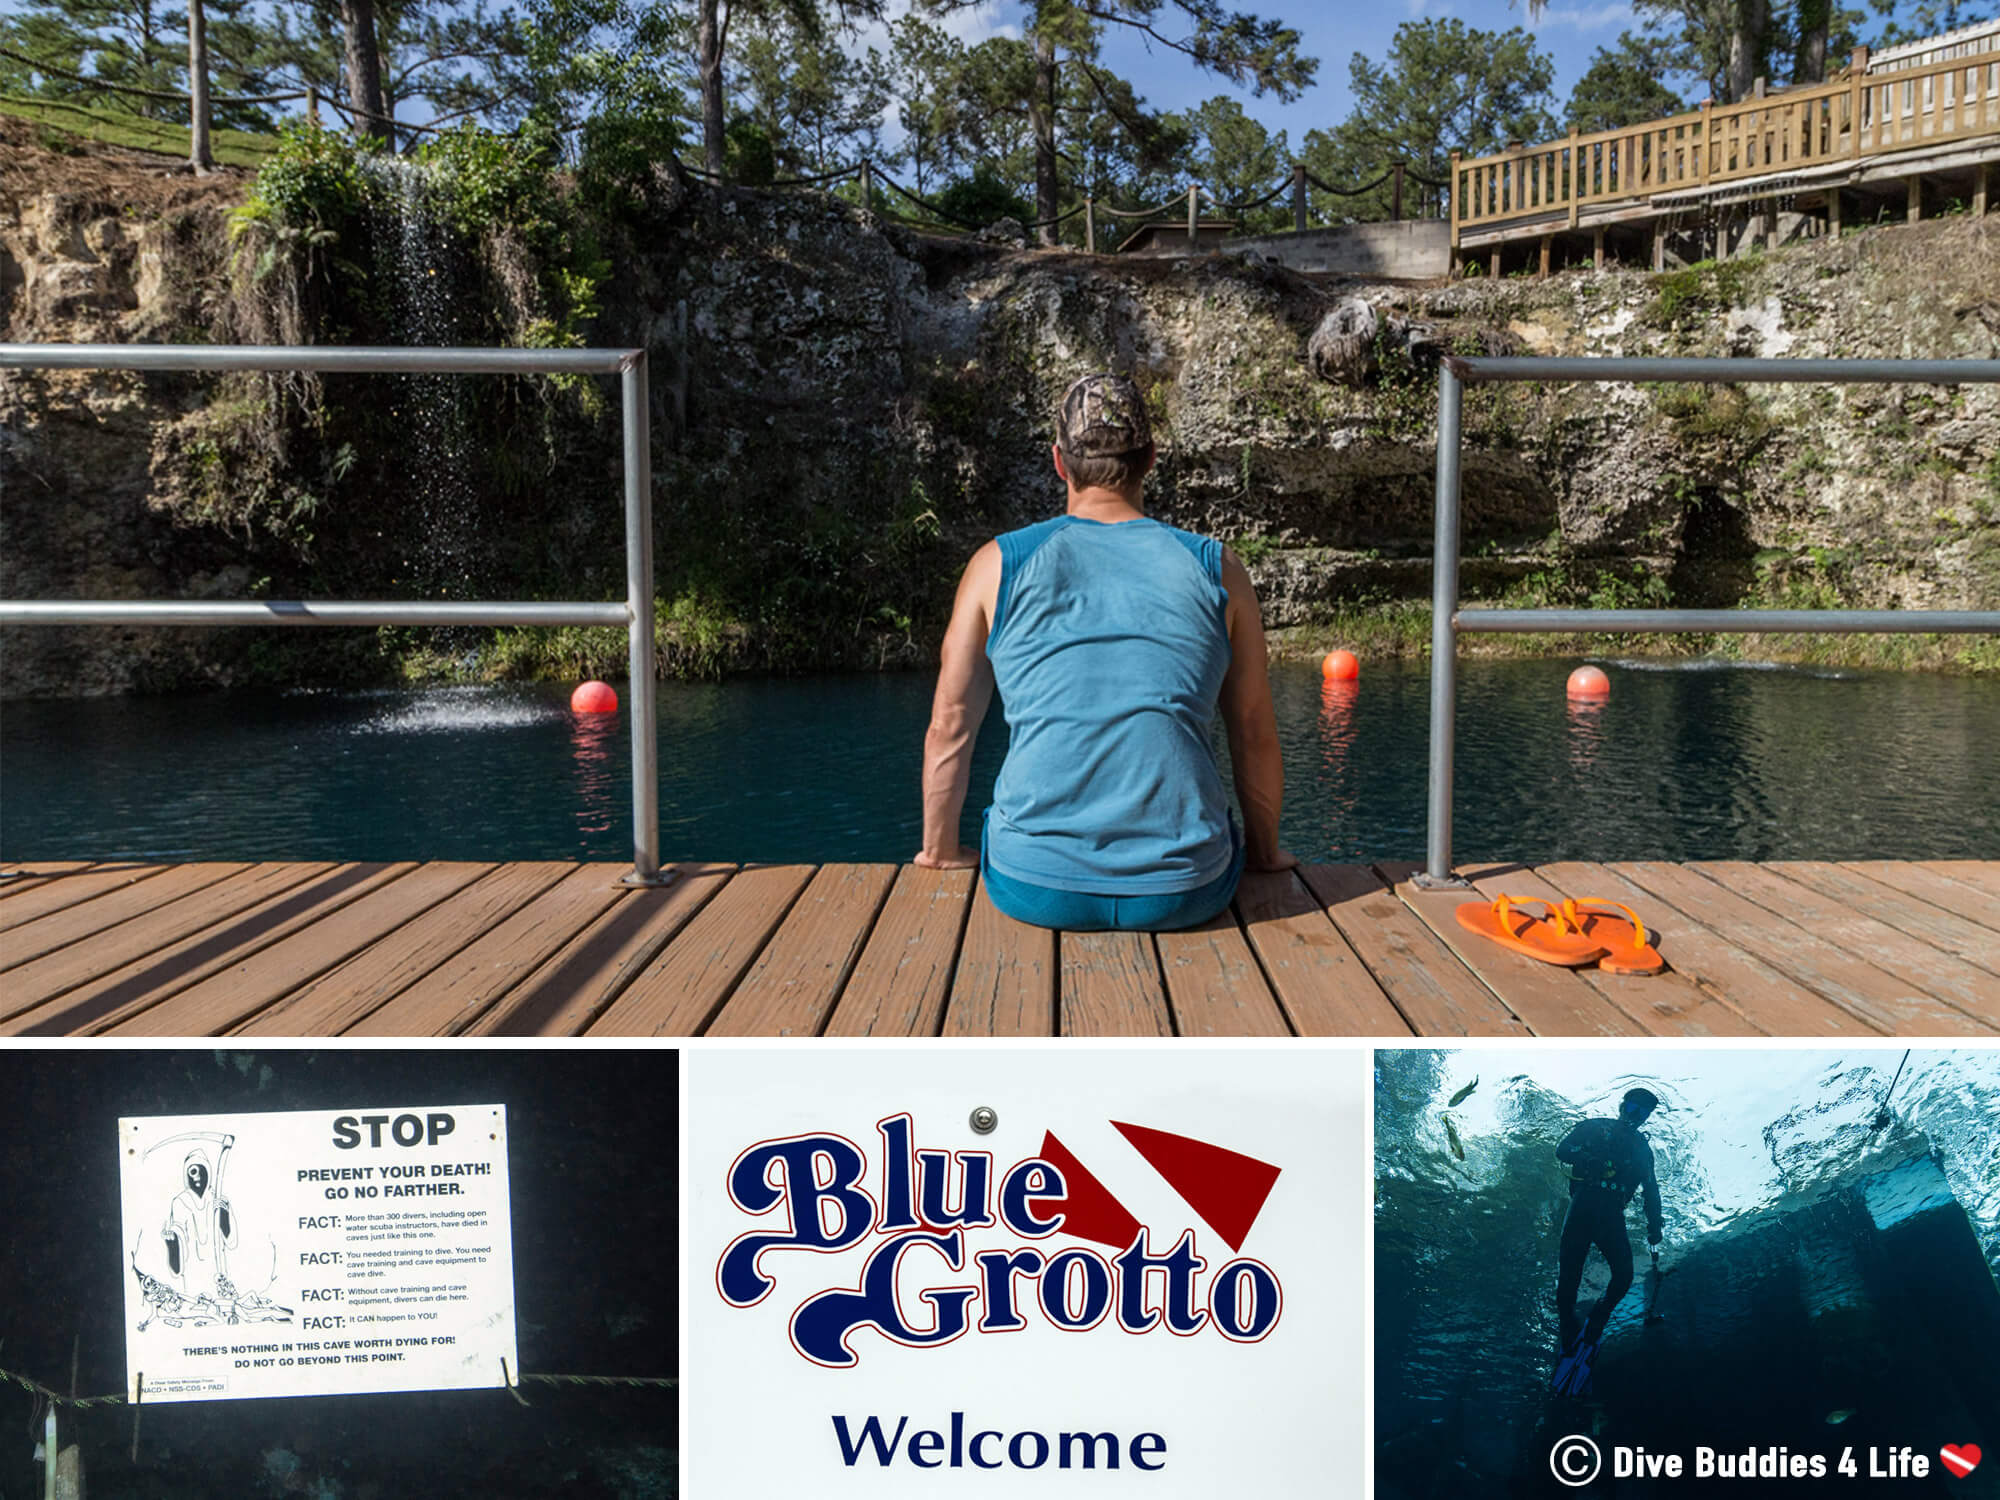 Mosaic Of All The Scuba Diving Things To See At The Blue Grotto Dive Resort In Williston, Florida, USA